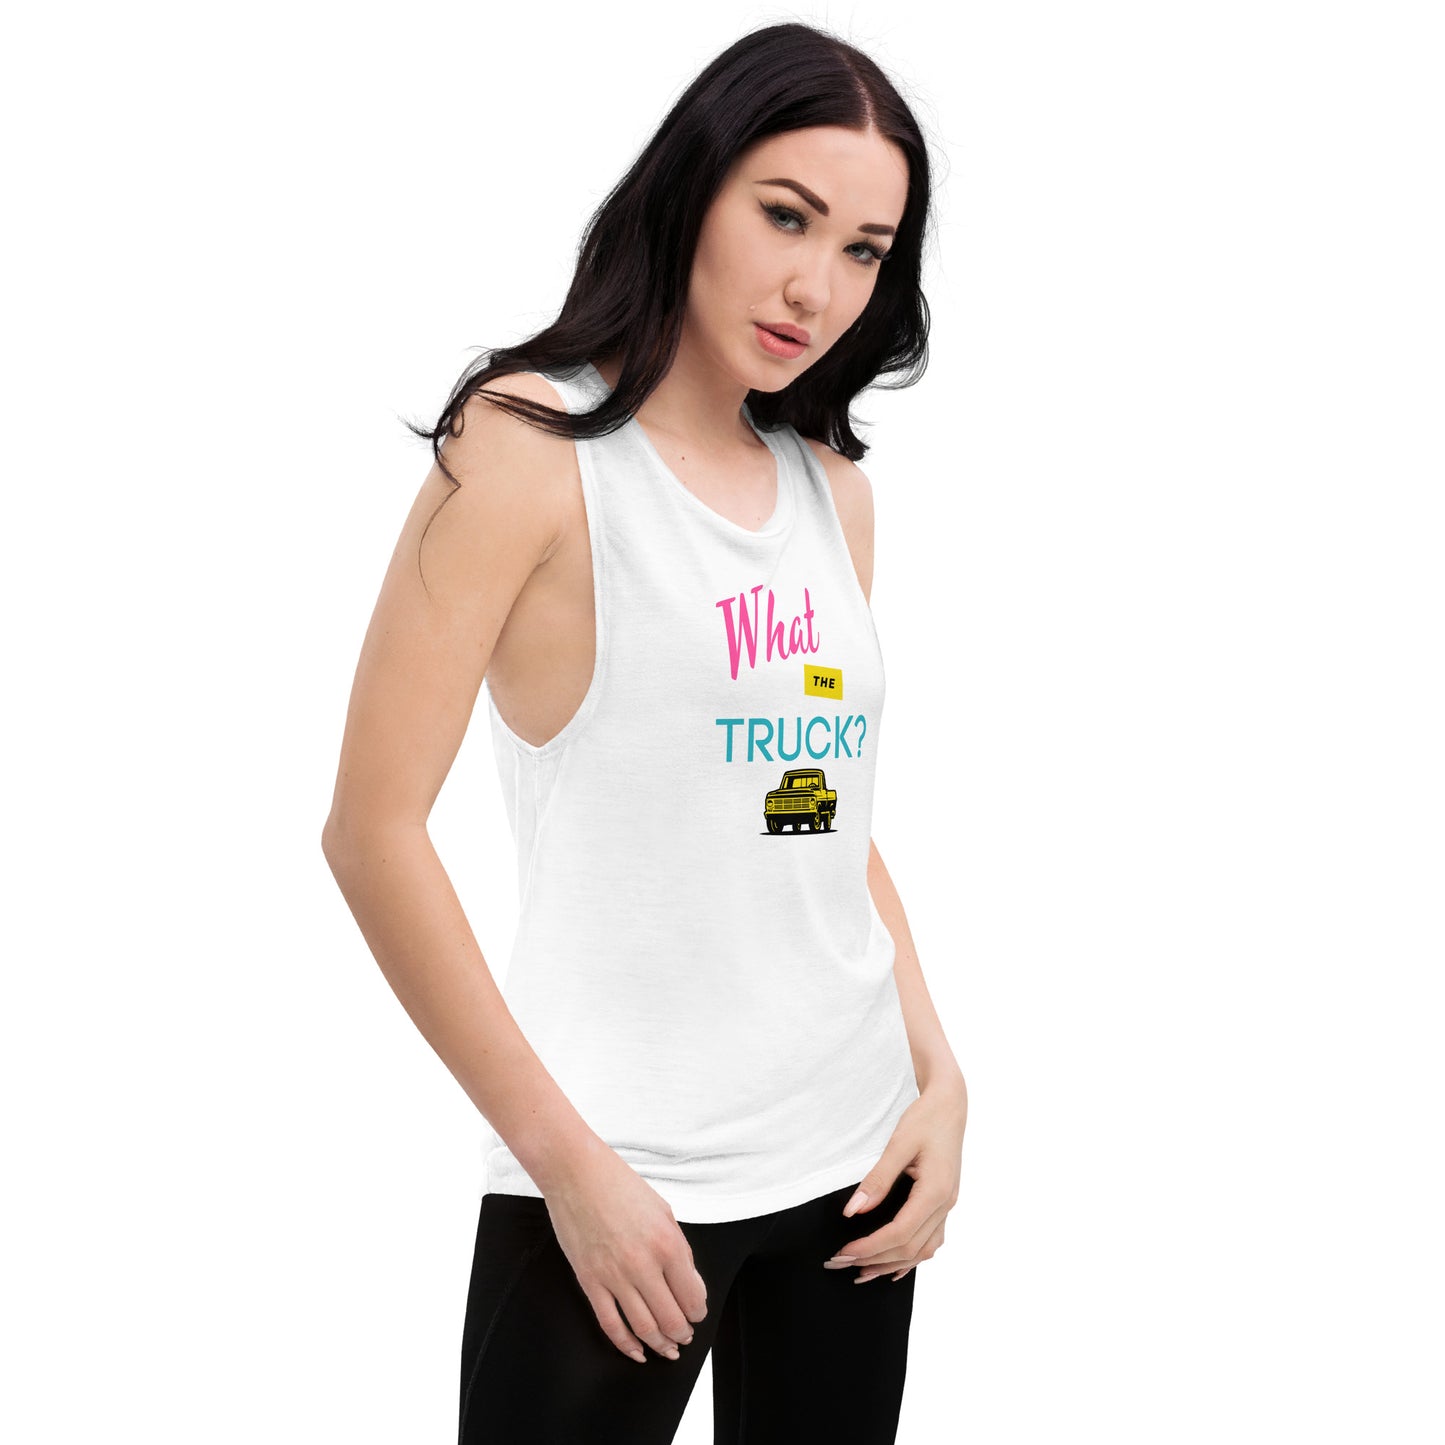 What The Truck? Ladies’ Muscle Tank